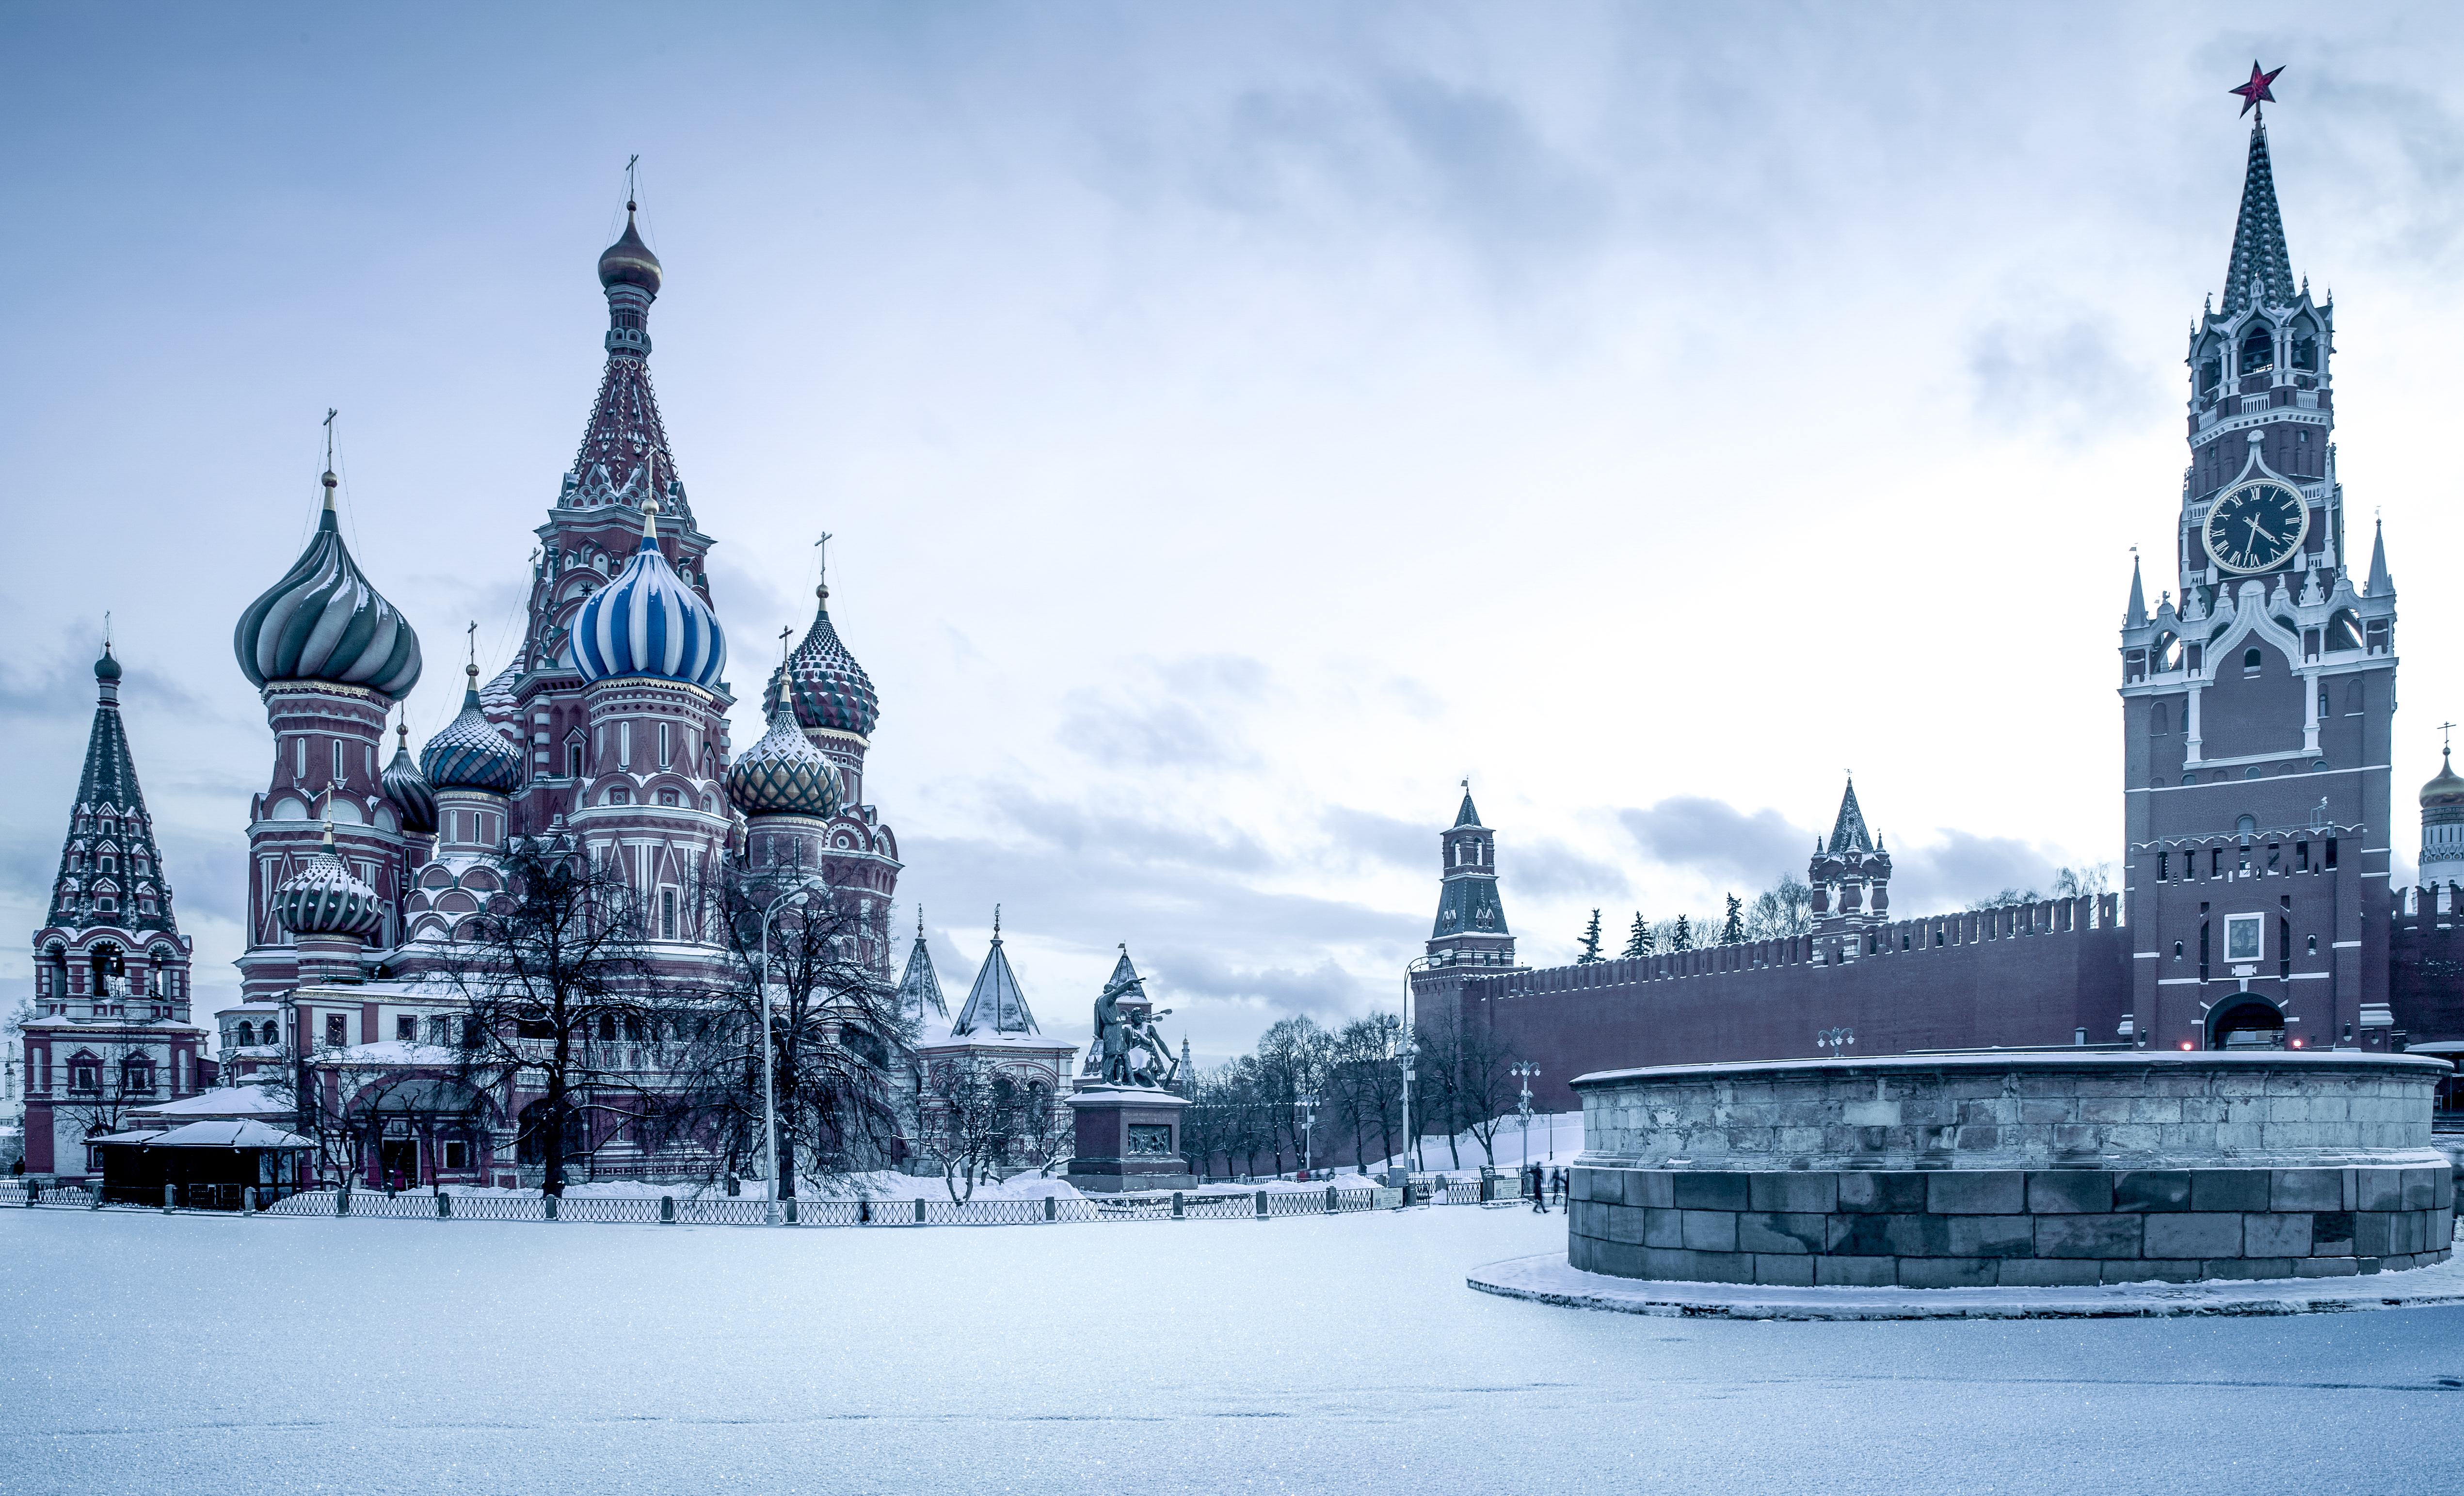 image of Red Square in Moscow